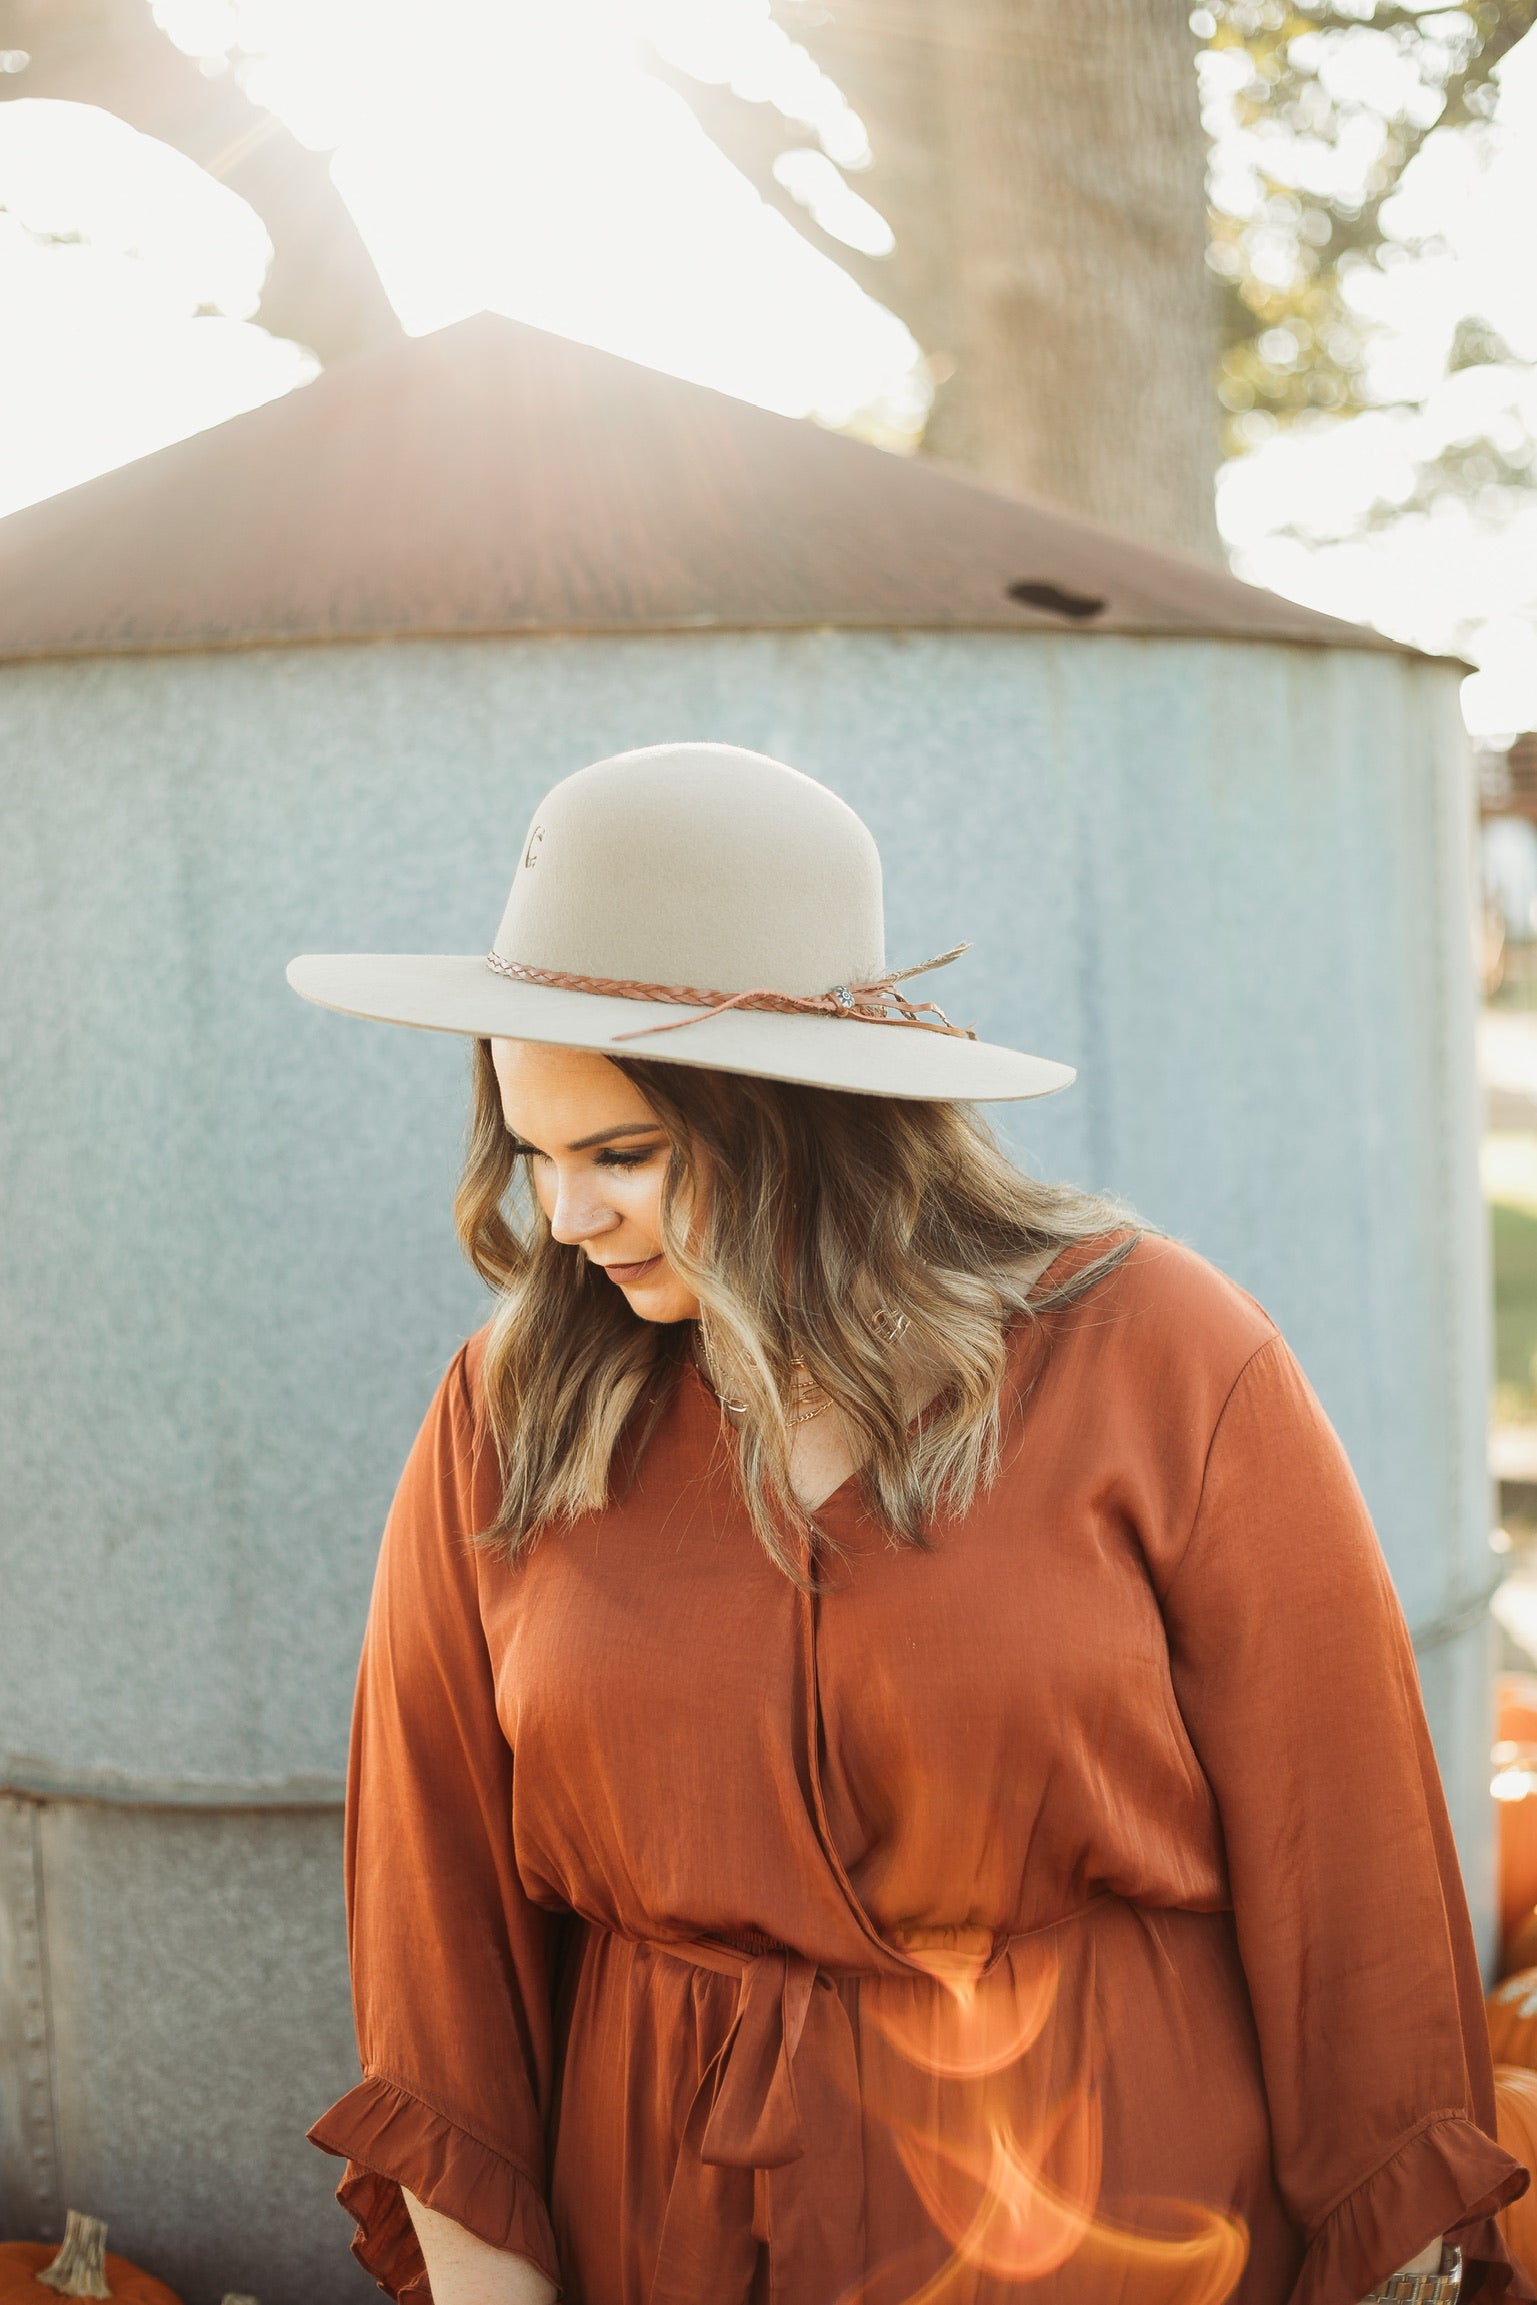 Charlie 1 Horse | Wanderlust Wool Felt Floppy Hat with Braided Band in Sand - Giddy Up Glamour Boutique